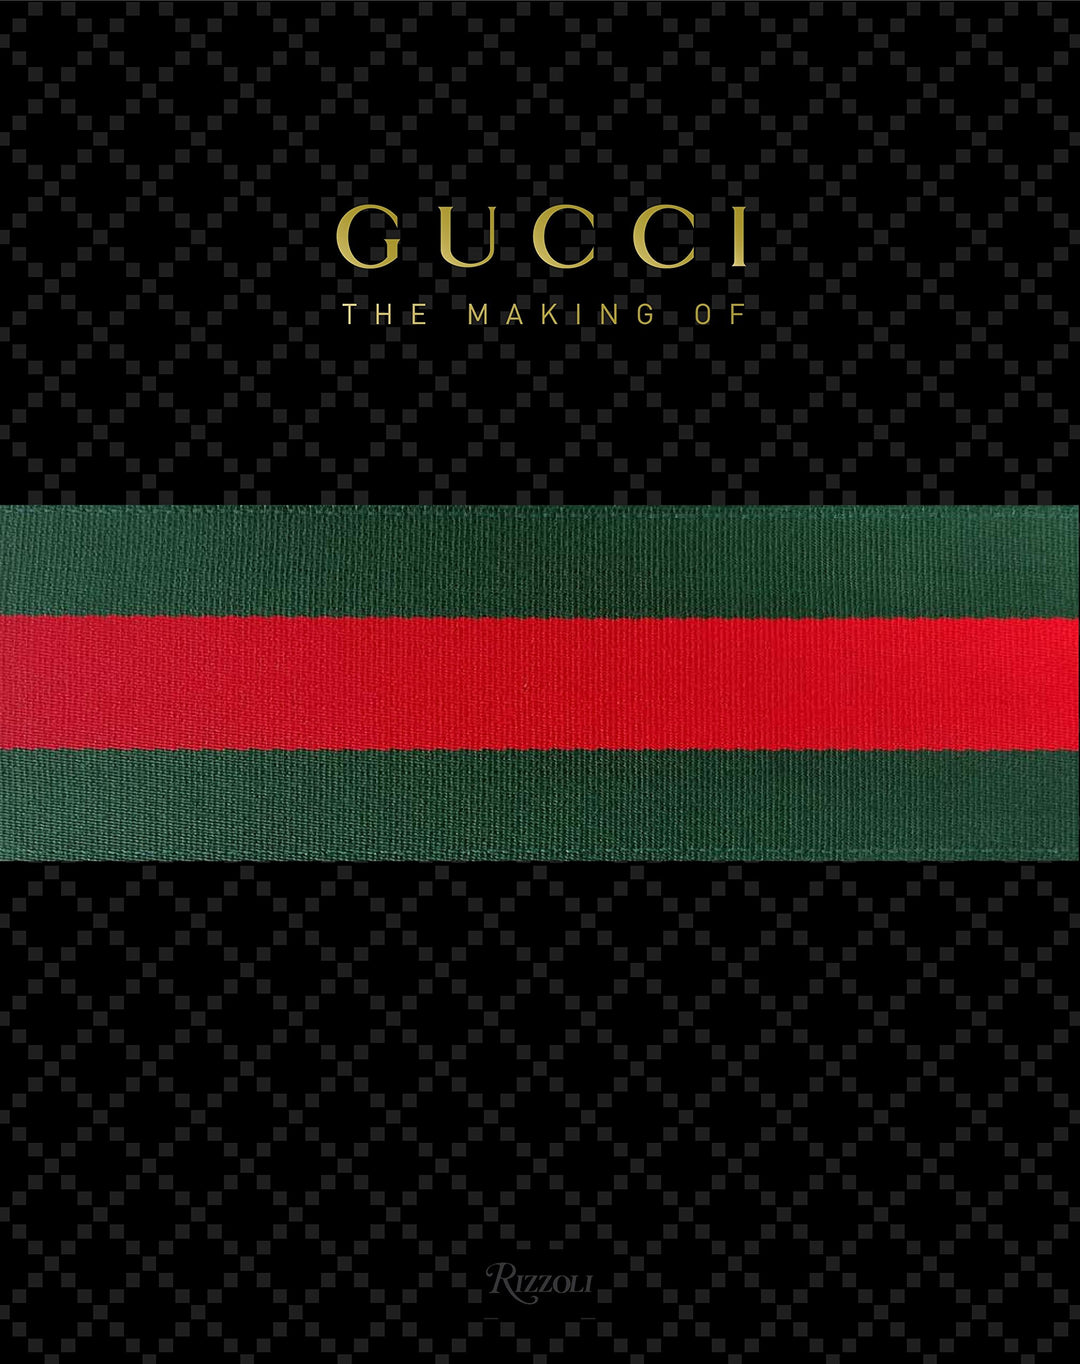 GUCCI THE MAKING OF